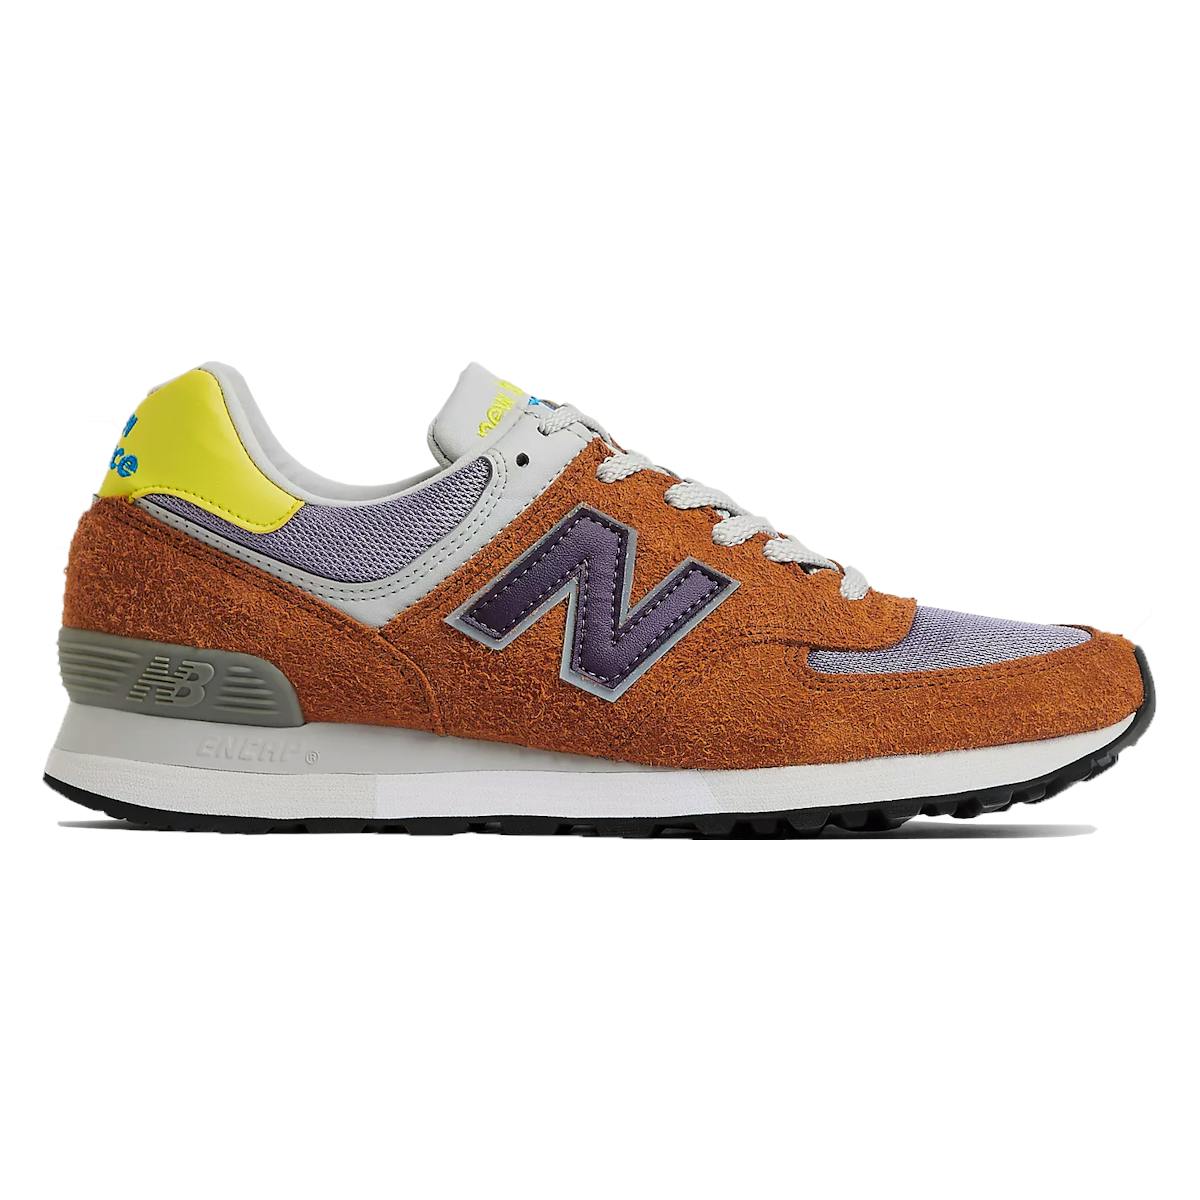 New Balance MADE in UK 576 "Apricot"